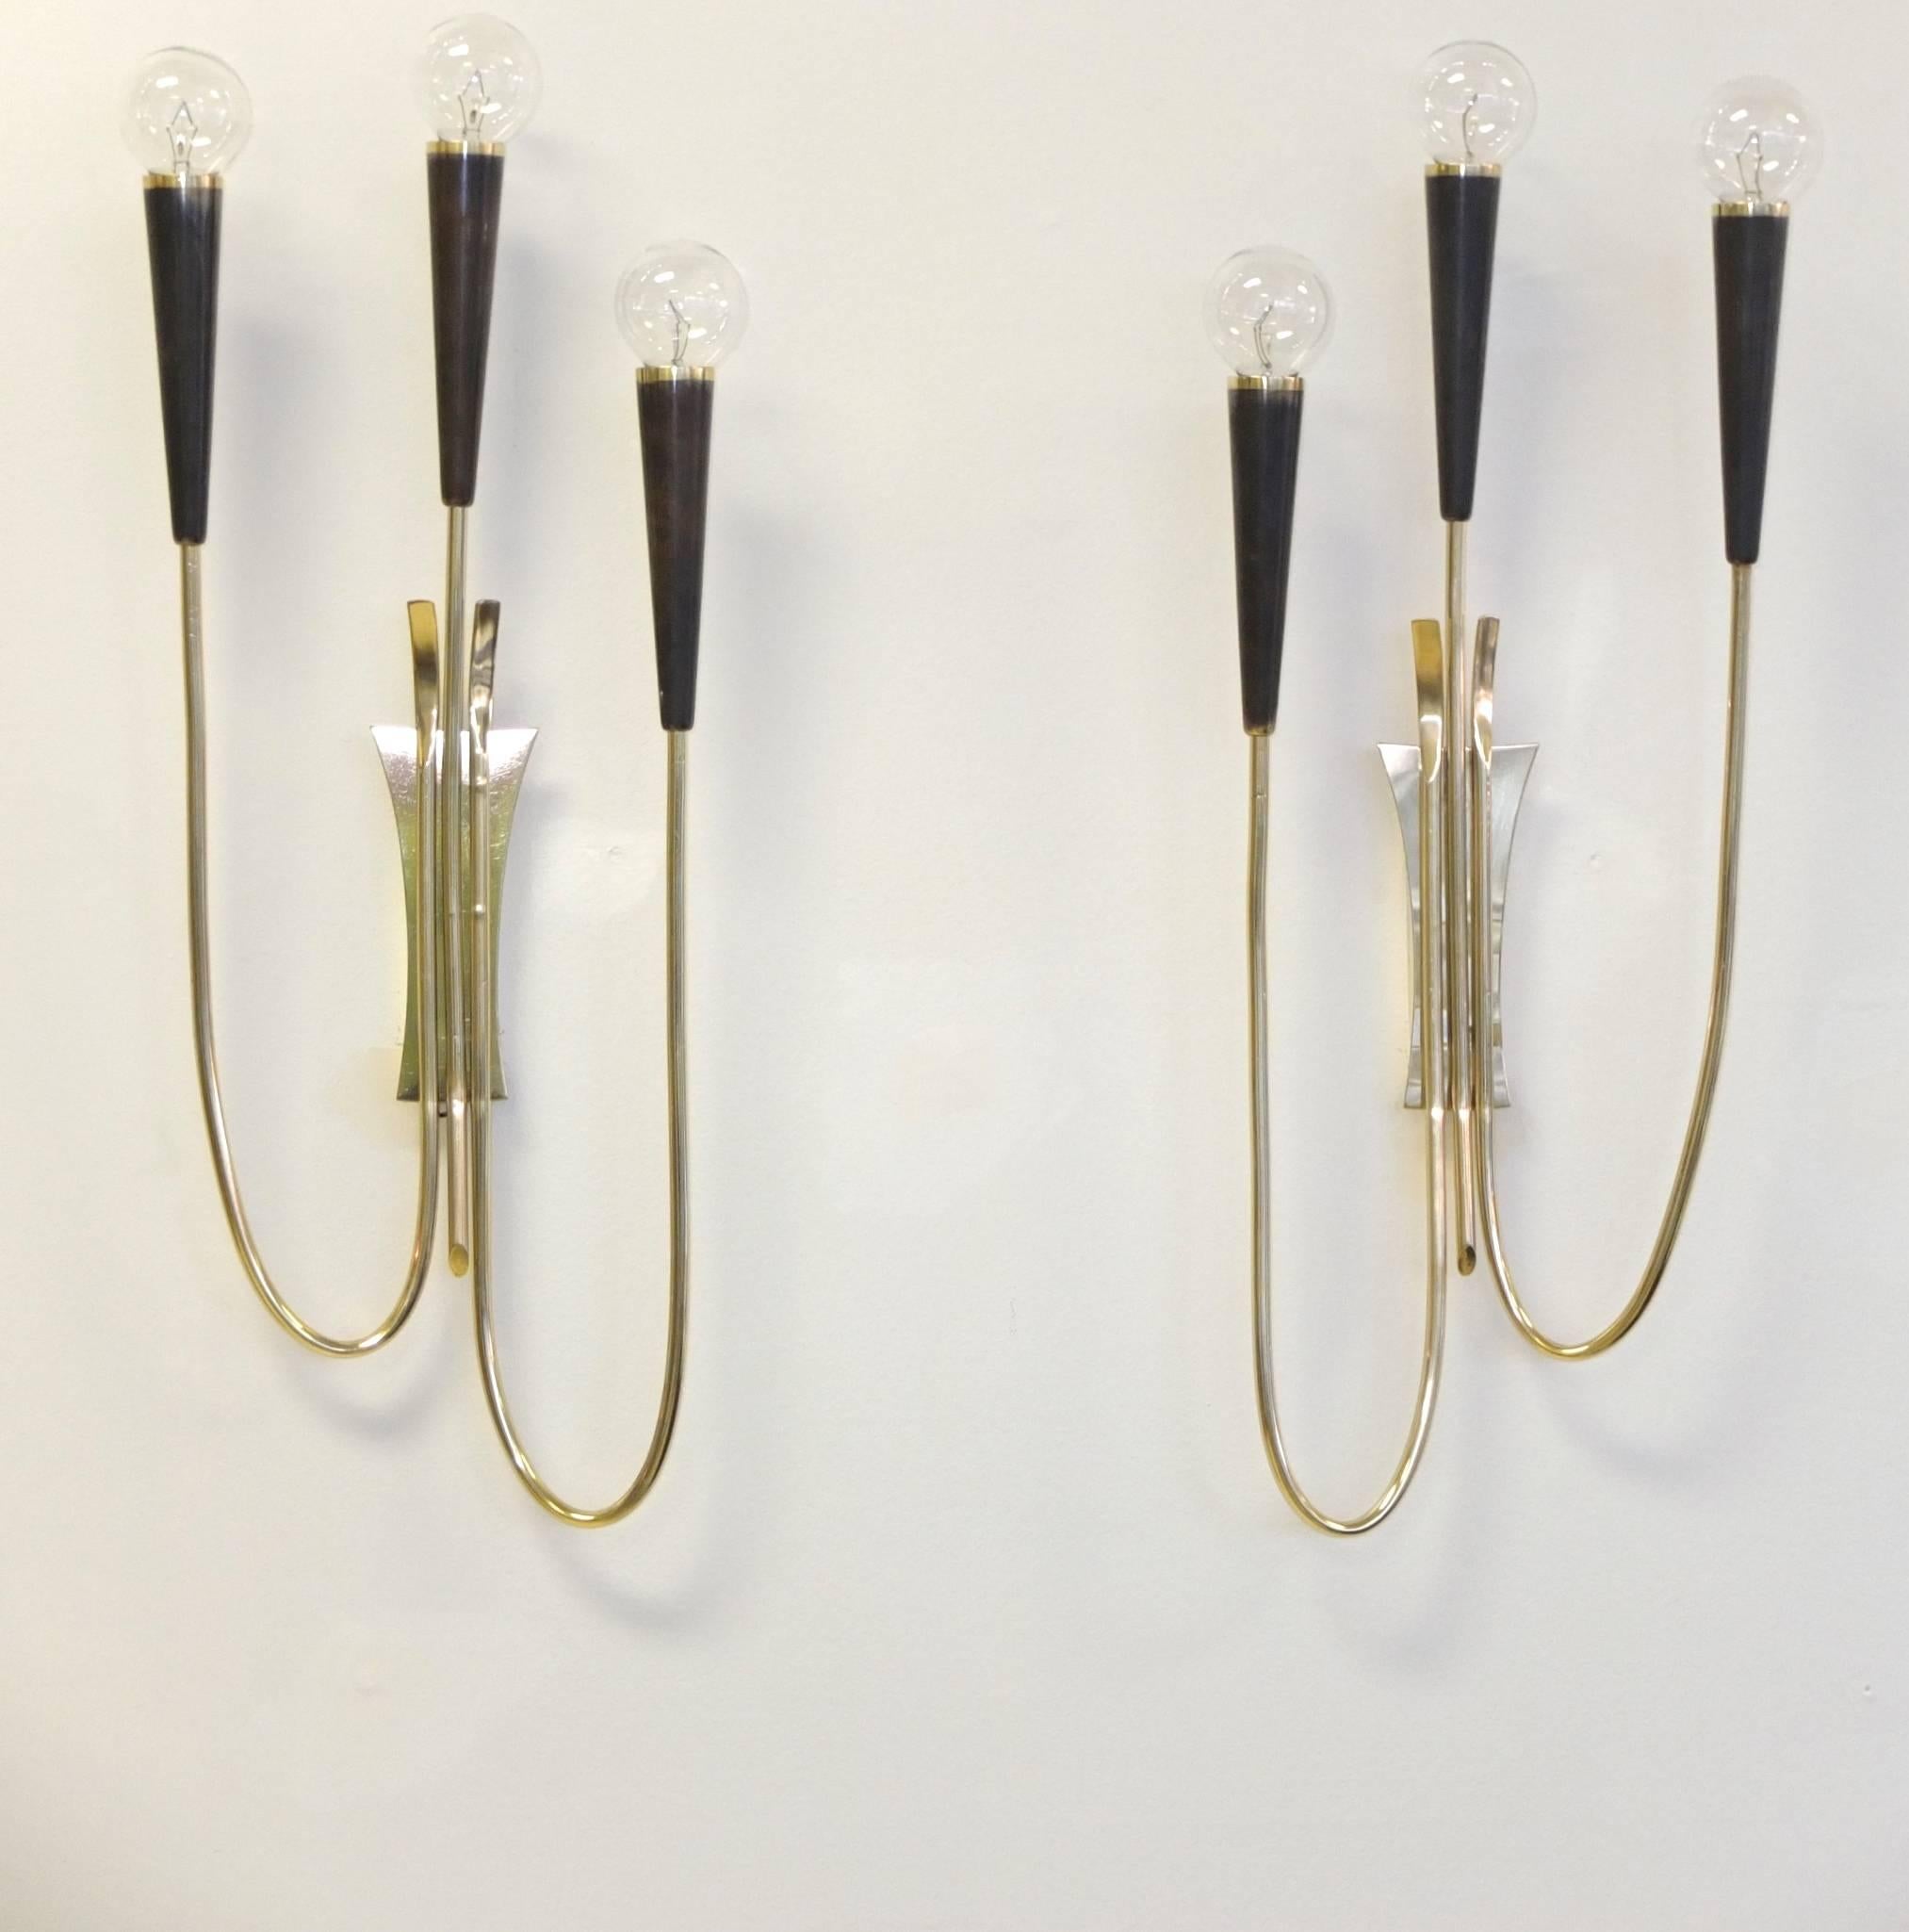 Pair of long and lanky French sconces each with two curled arms and one straight up, each arm terminating in a long brass cone in gunmetal finish with brass rim.